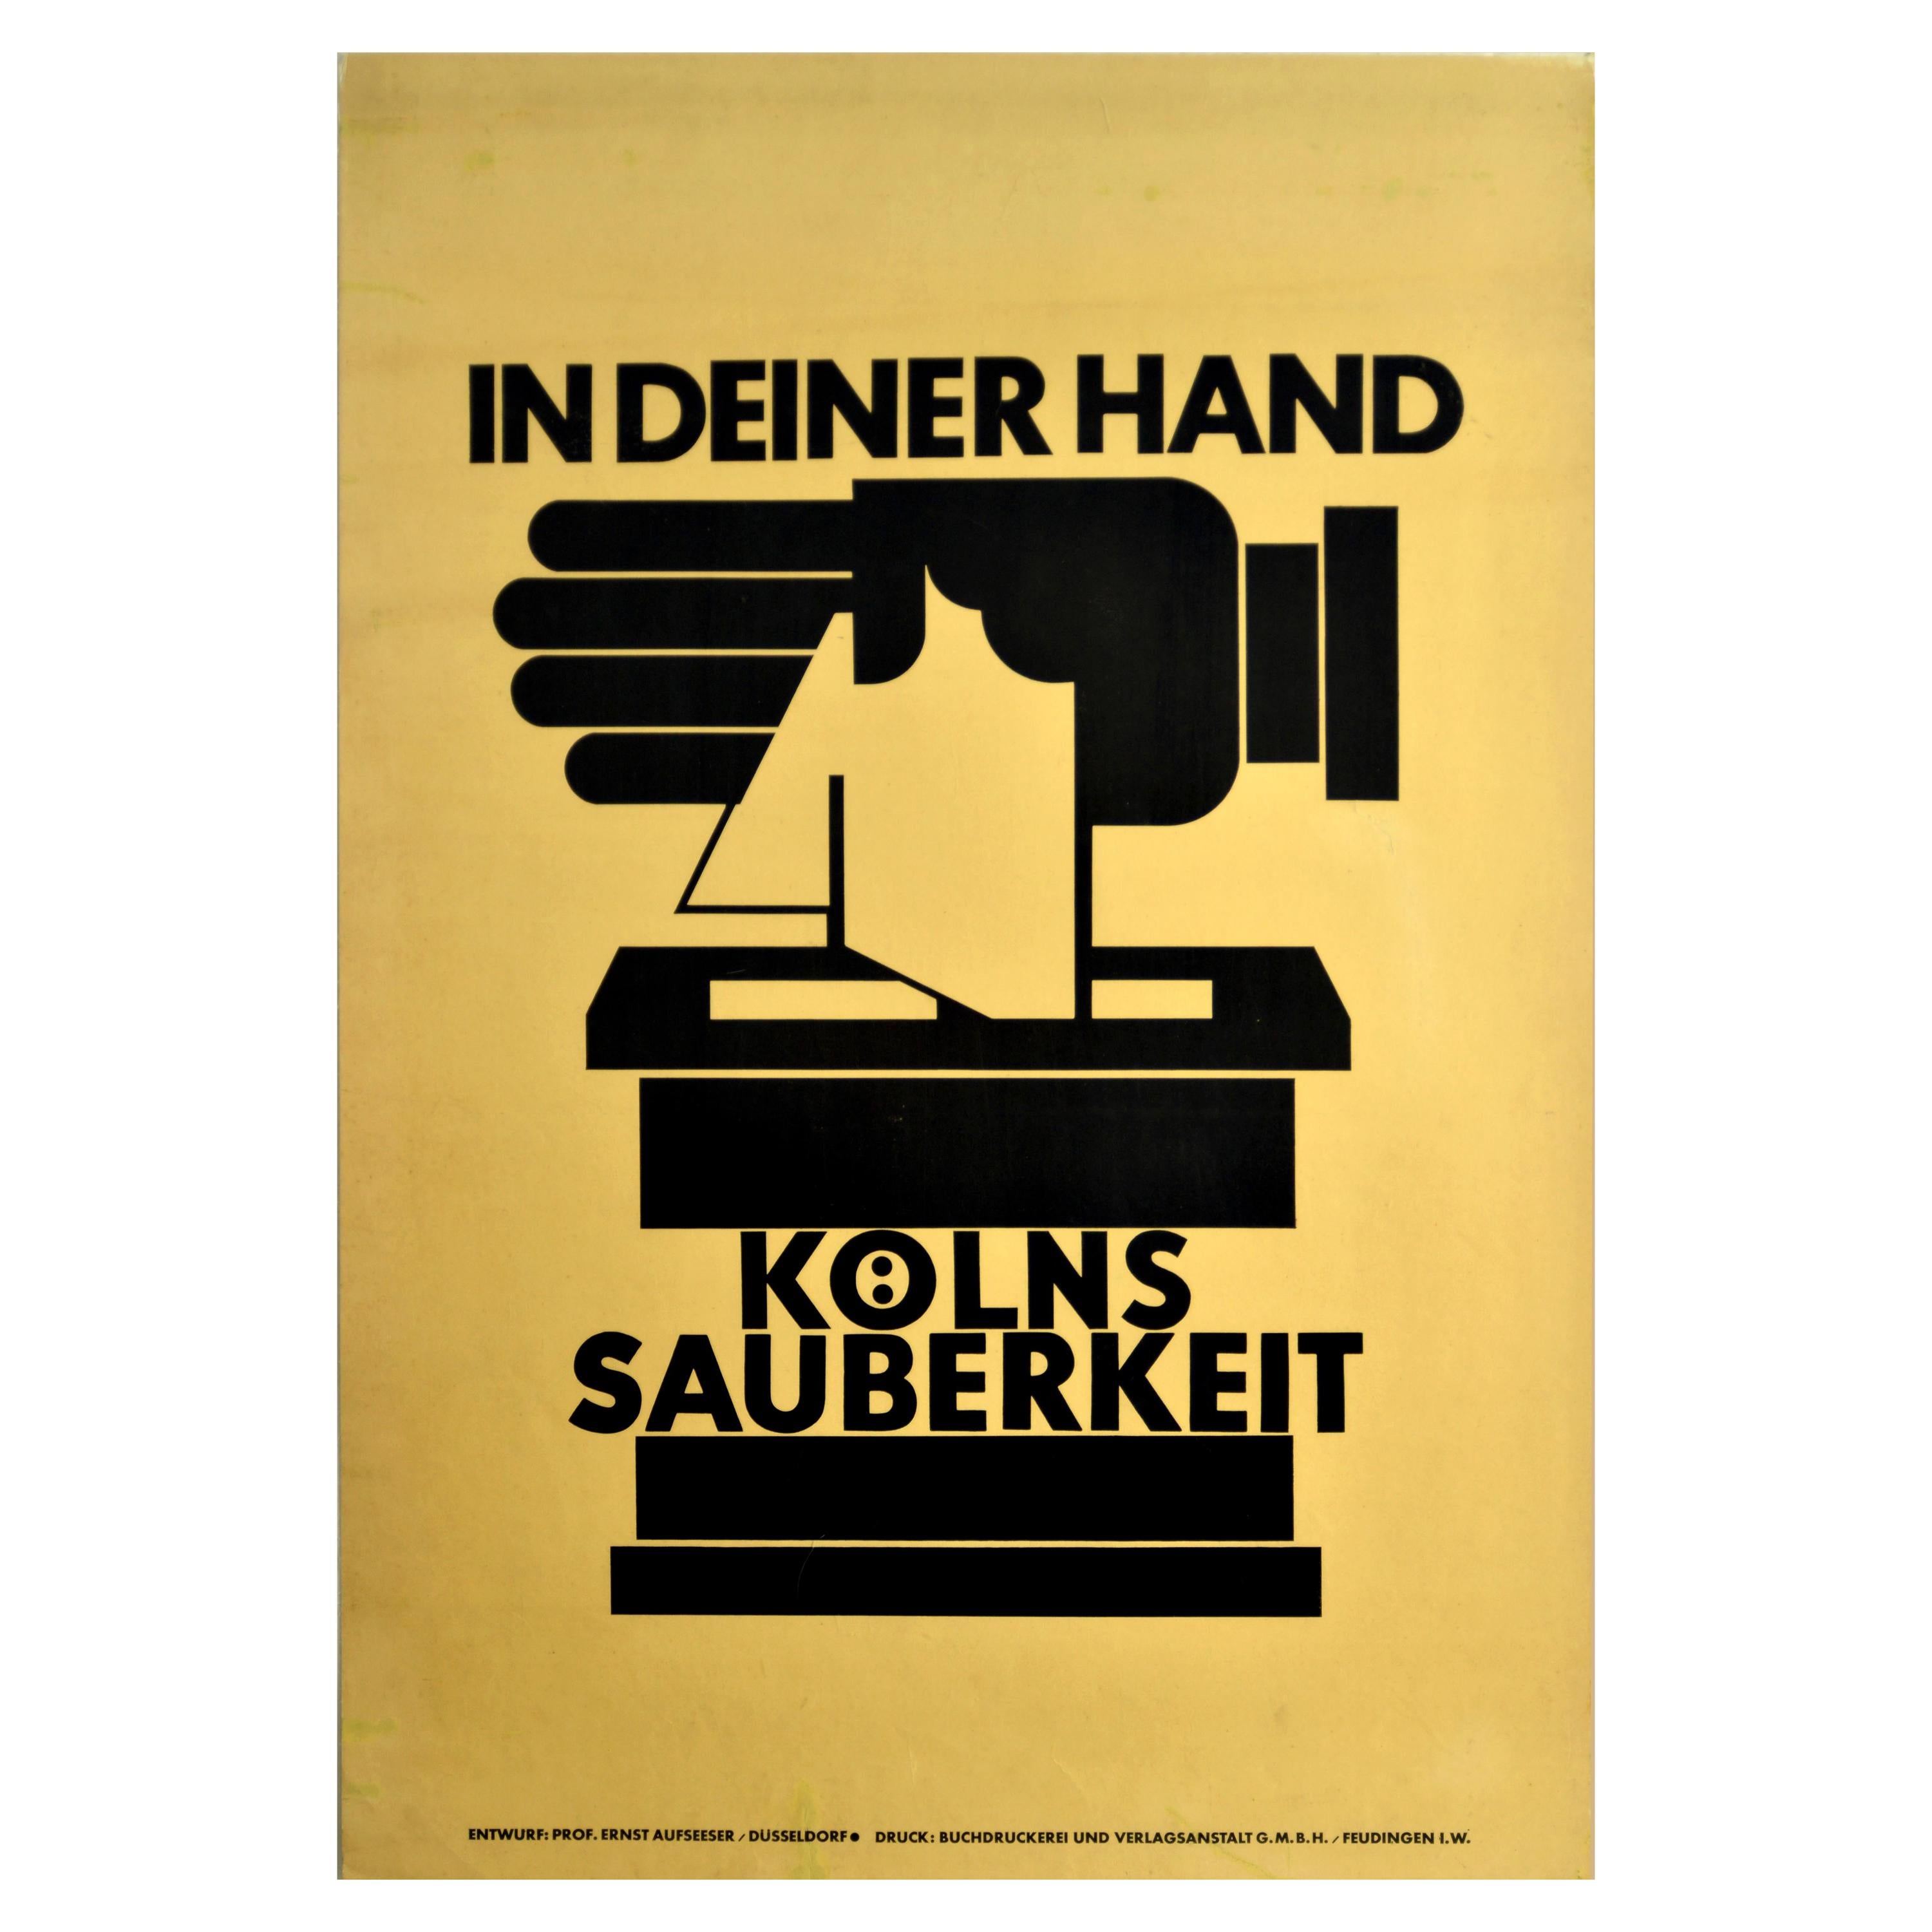 Original Vintage Poster Cleanliness In Your Hand Hygiene Bauhaus Graphic Design For Sale